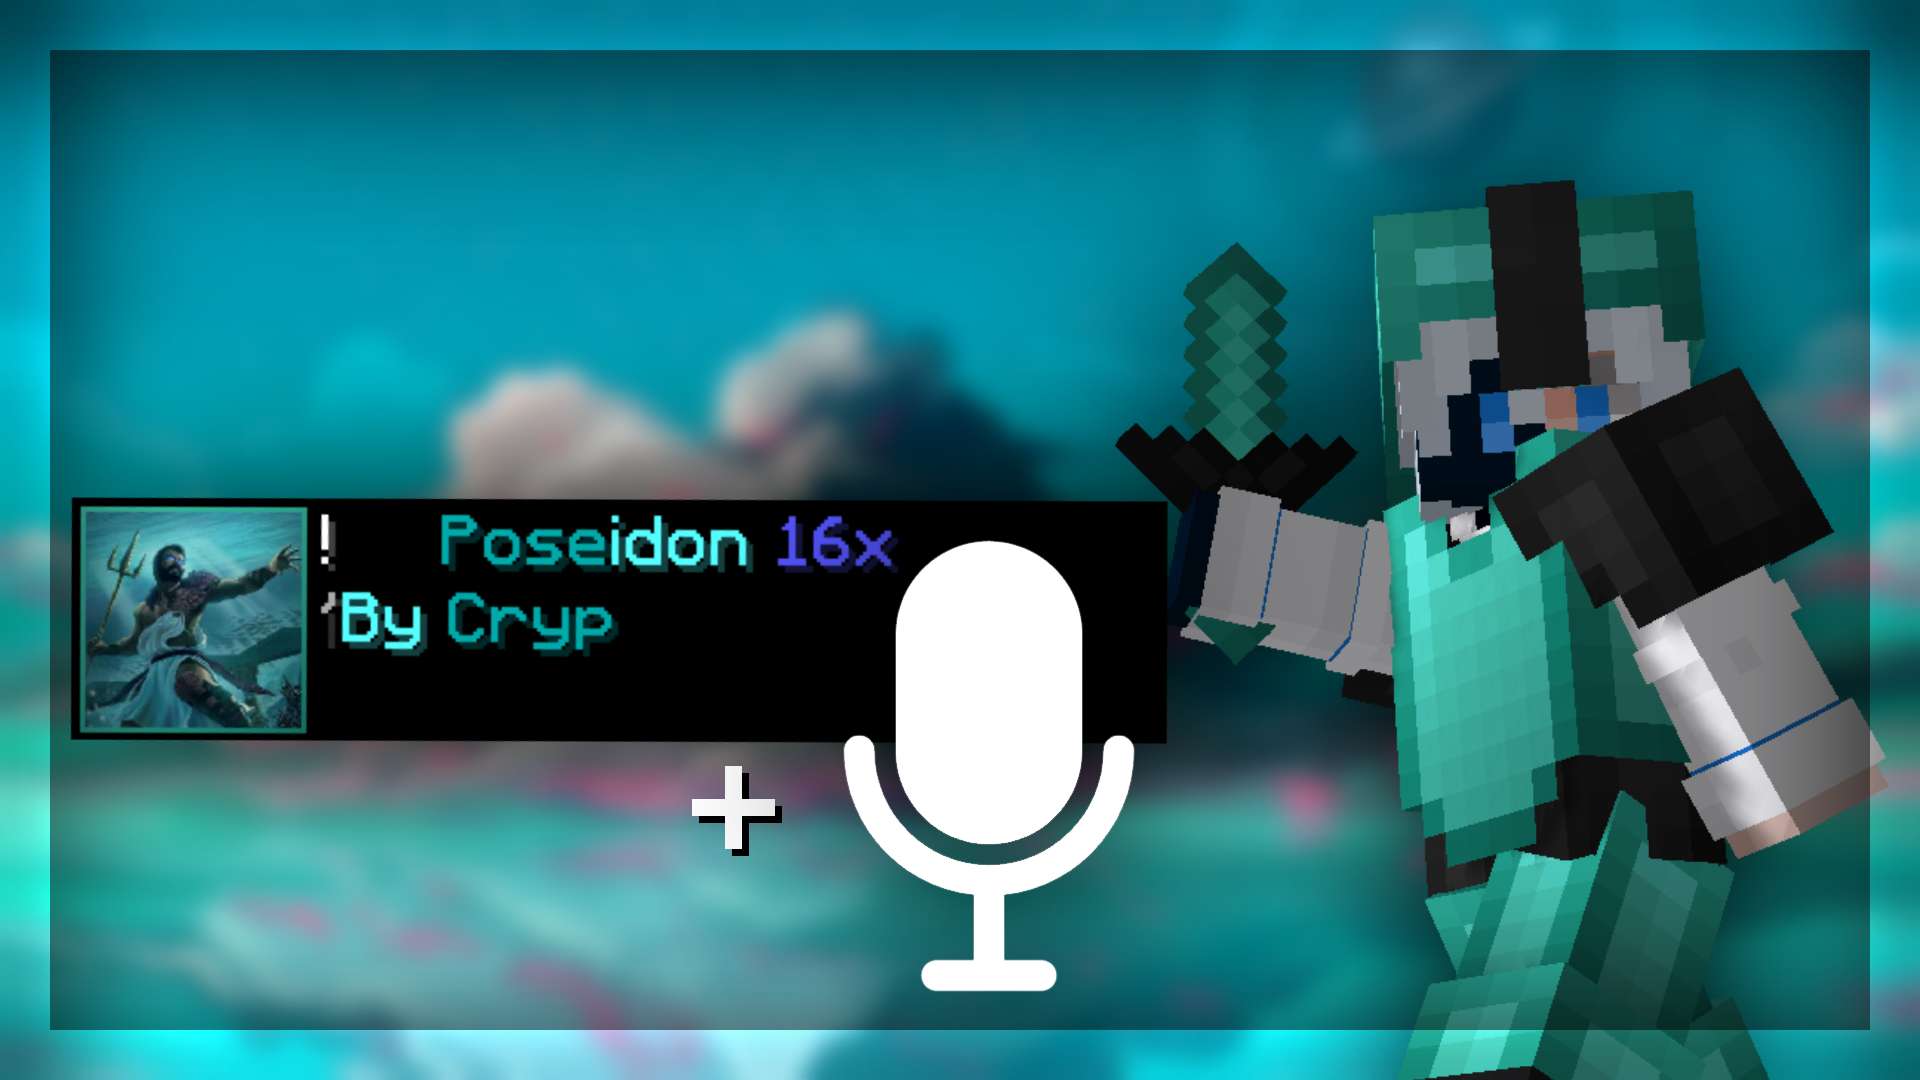 Poseidon 16x 16 by Cryp on PvPRP